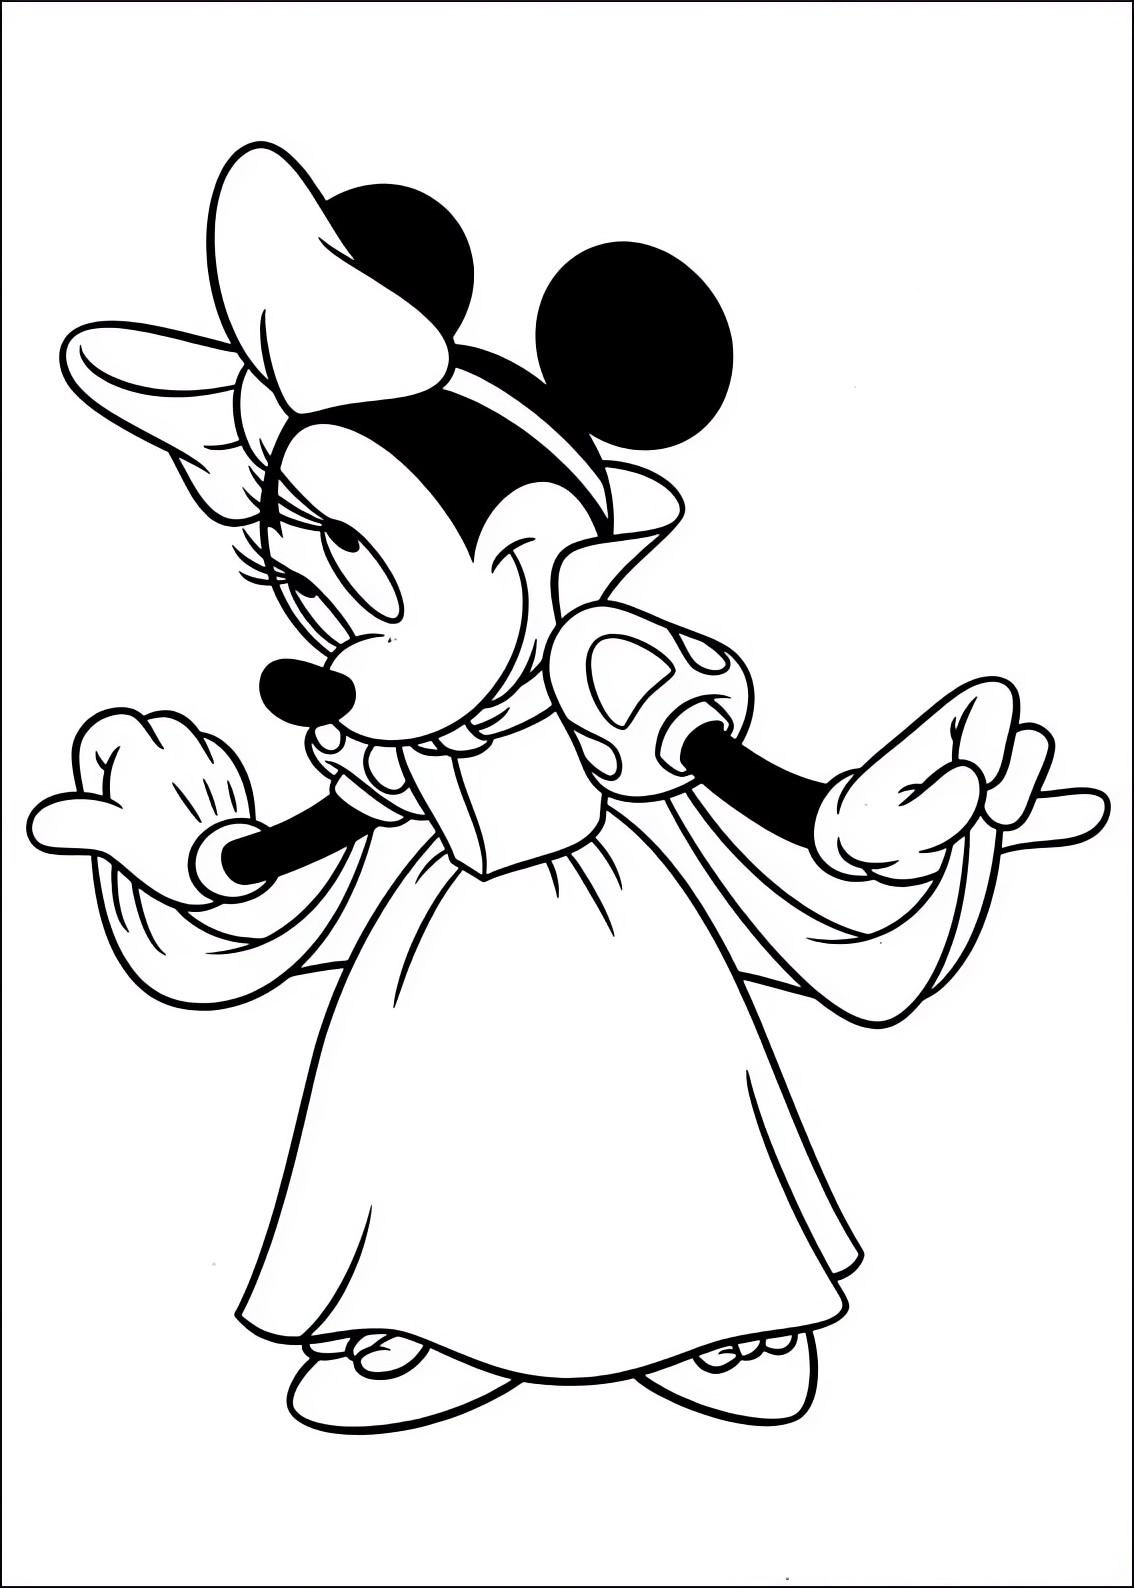 Minnie Snow White coloring page